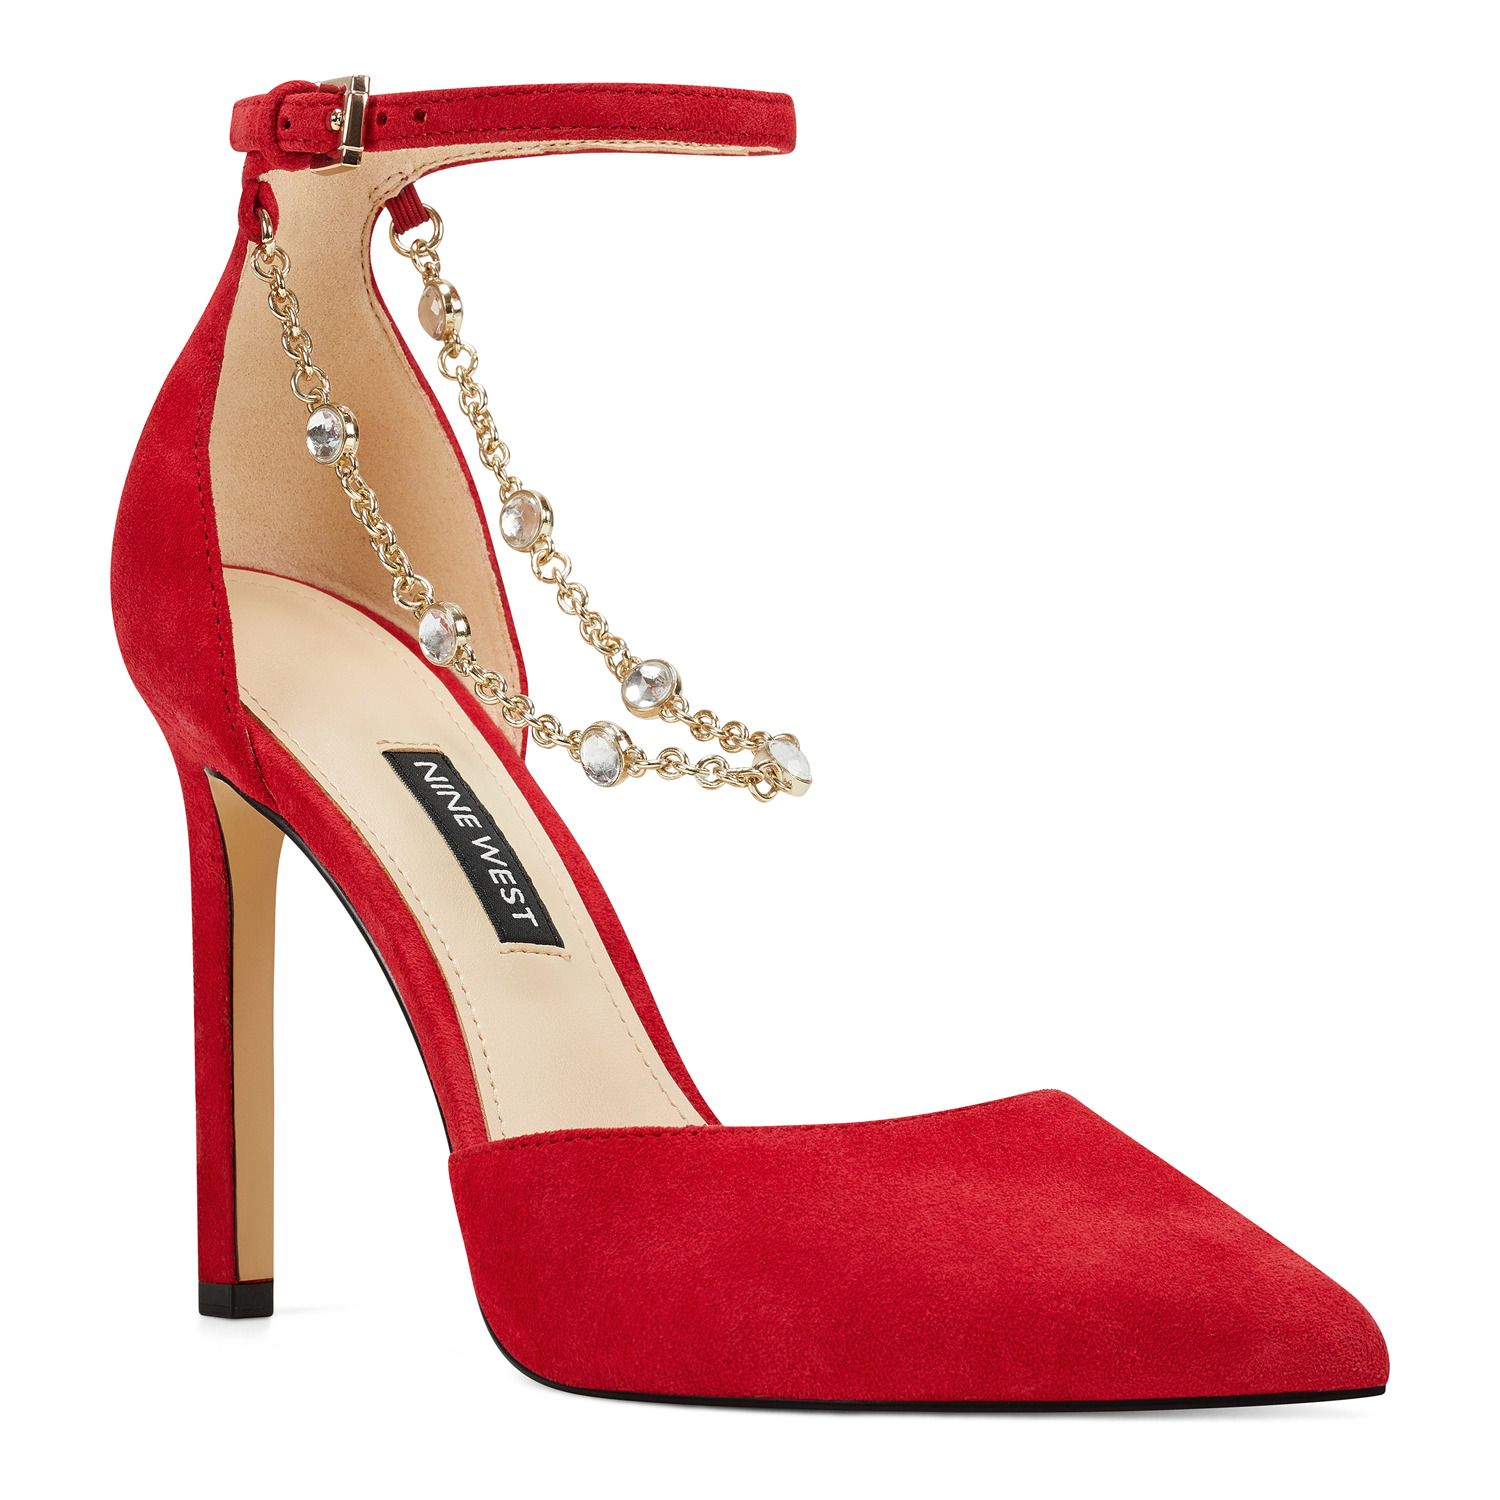 red small heel shoes